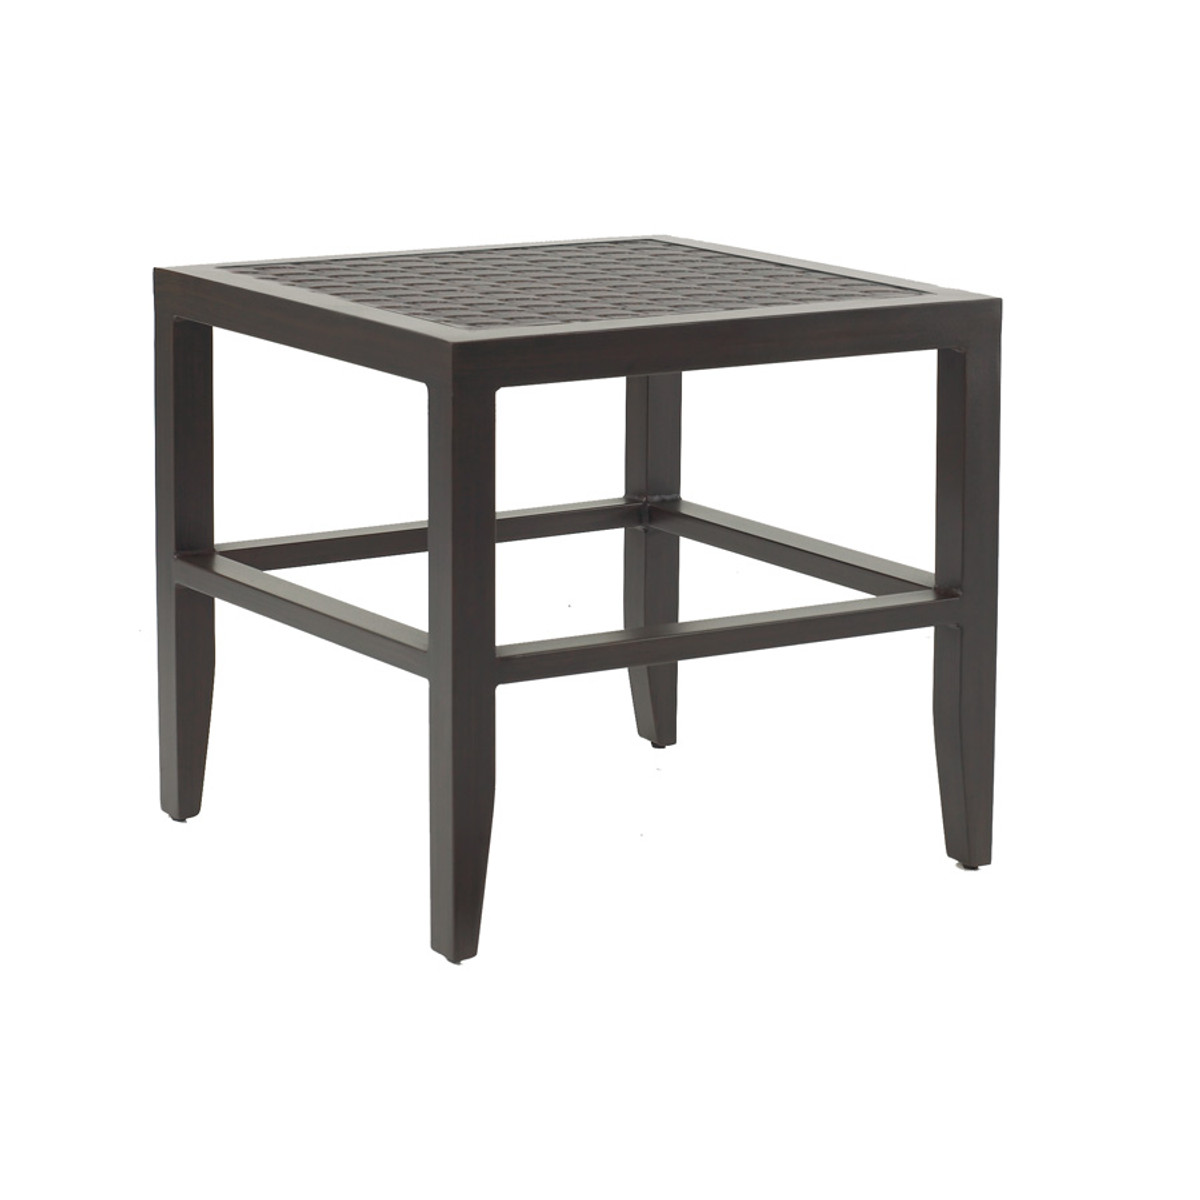 23.5″ CLASSICAL SQUARE SIDE TABLE